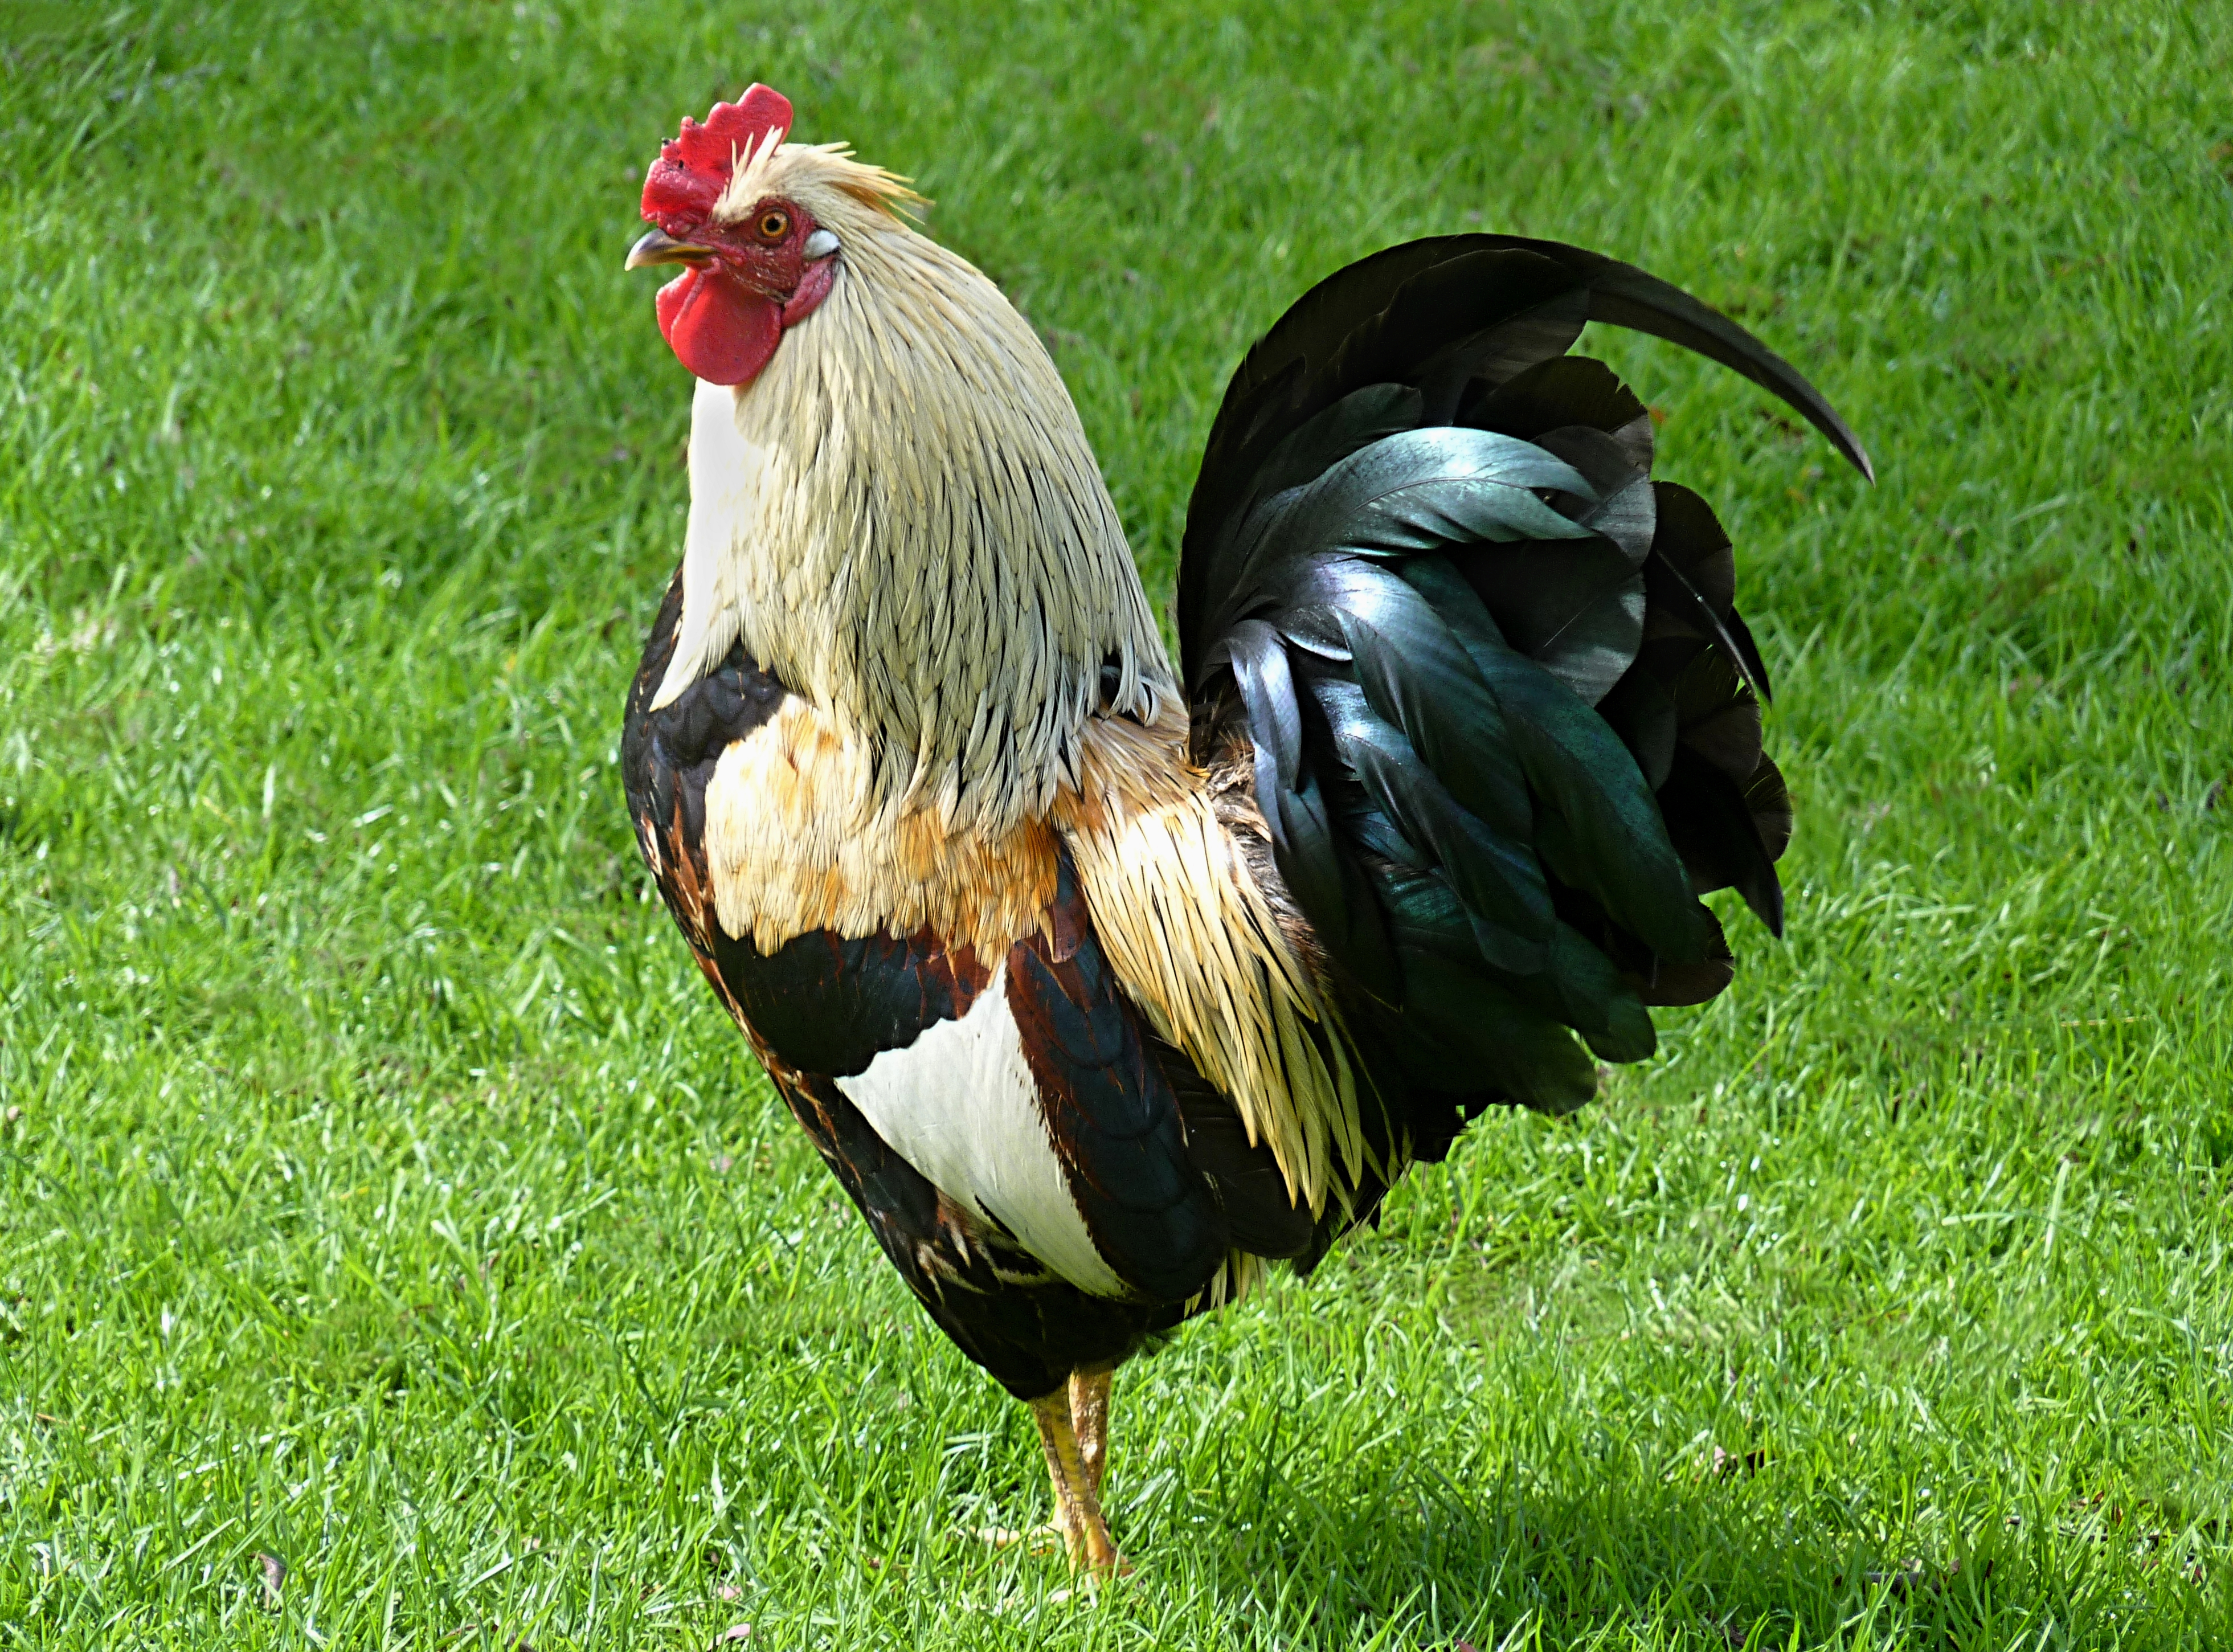 File:Rooster J2.jpg - Wikimedia Commons